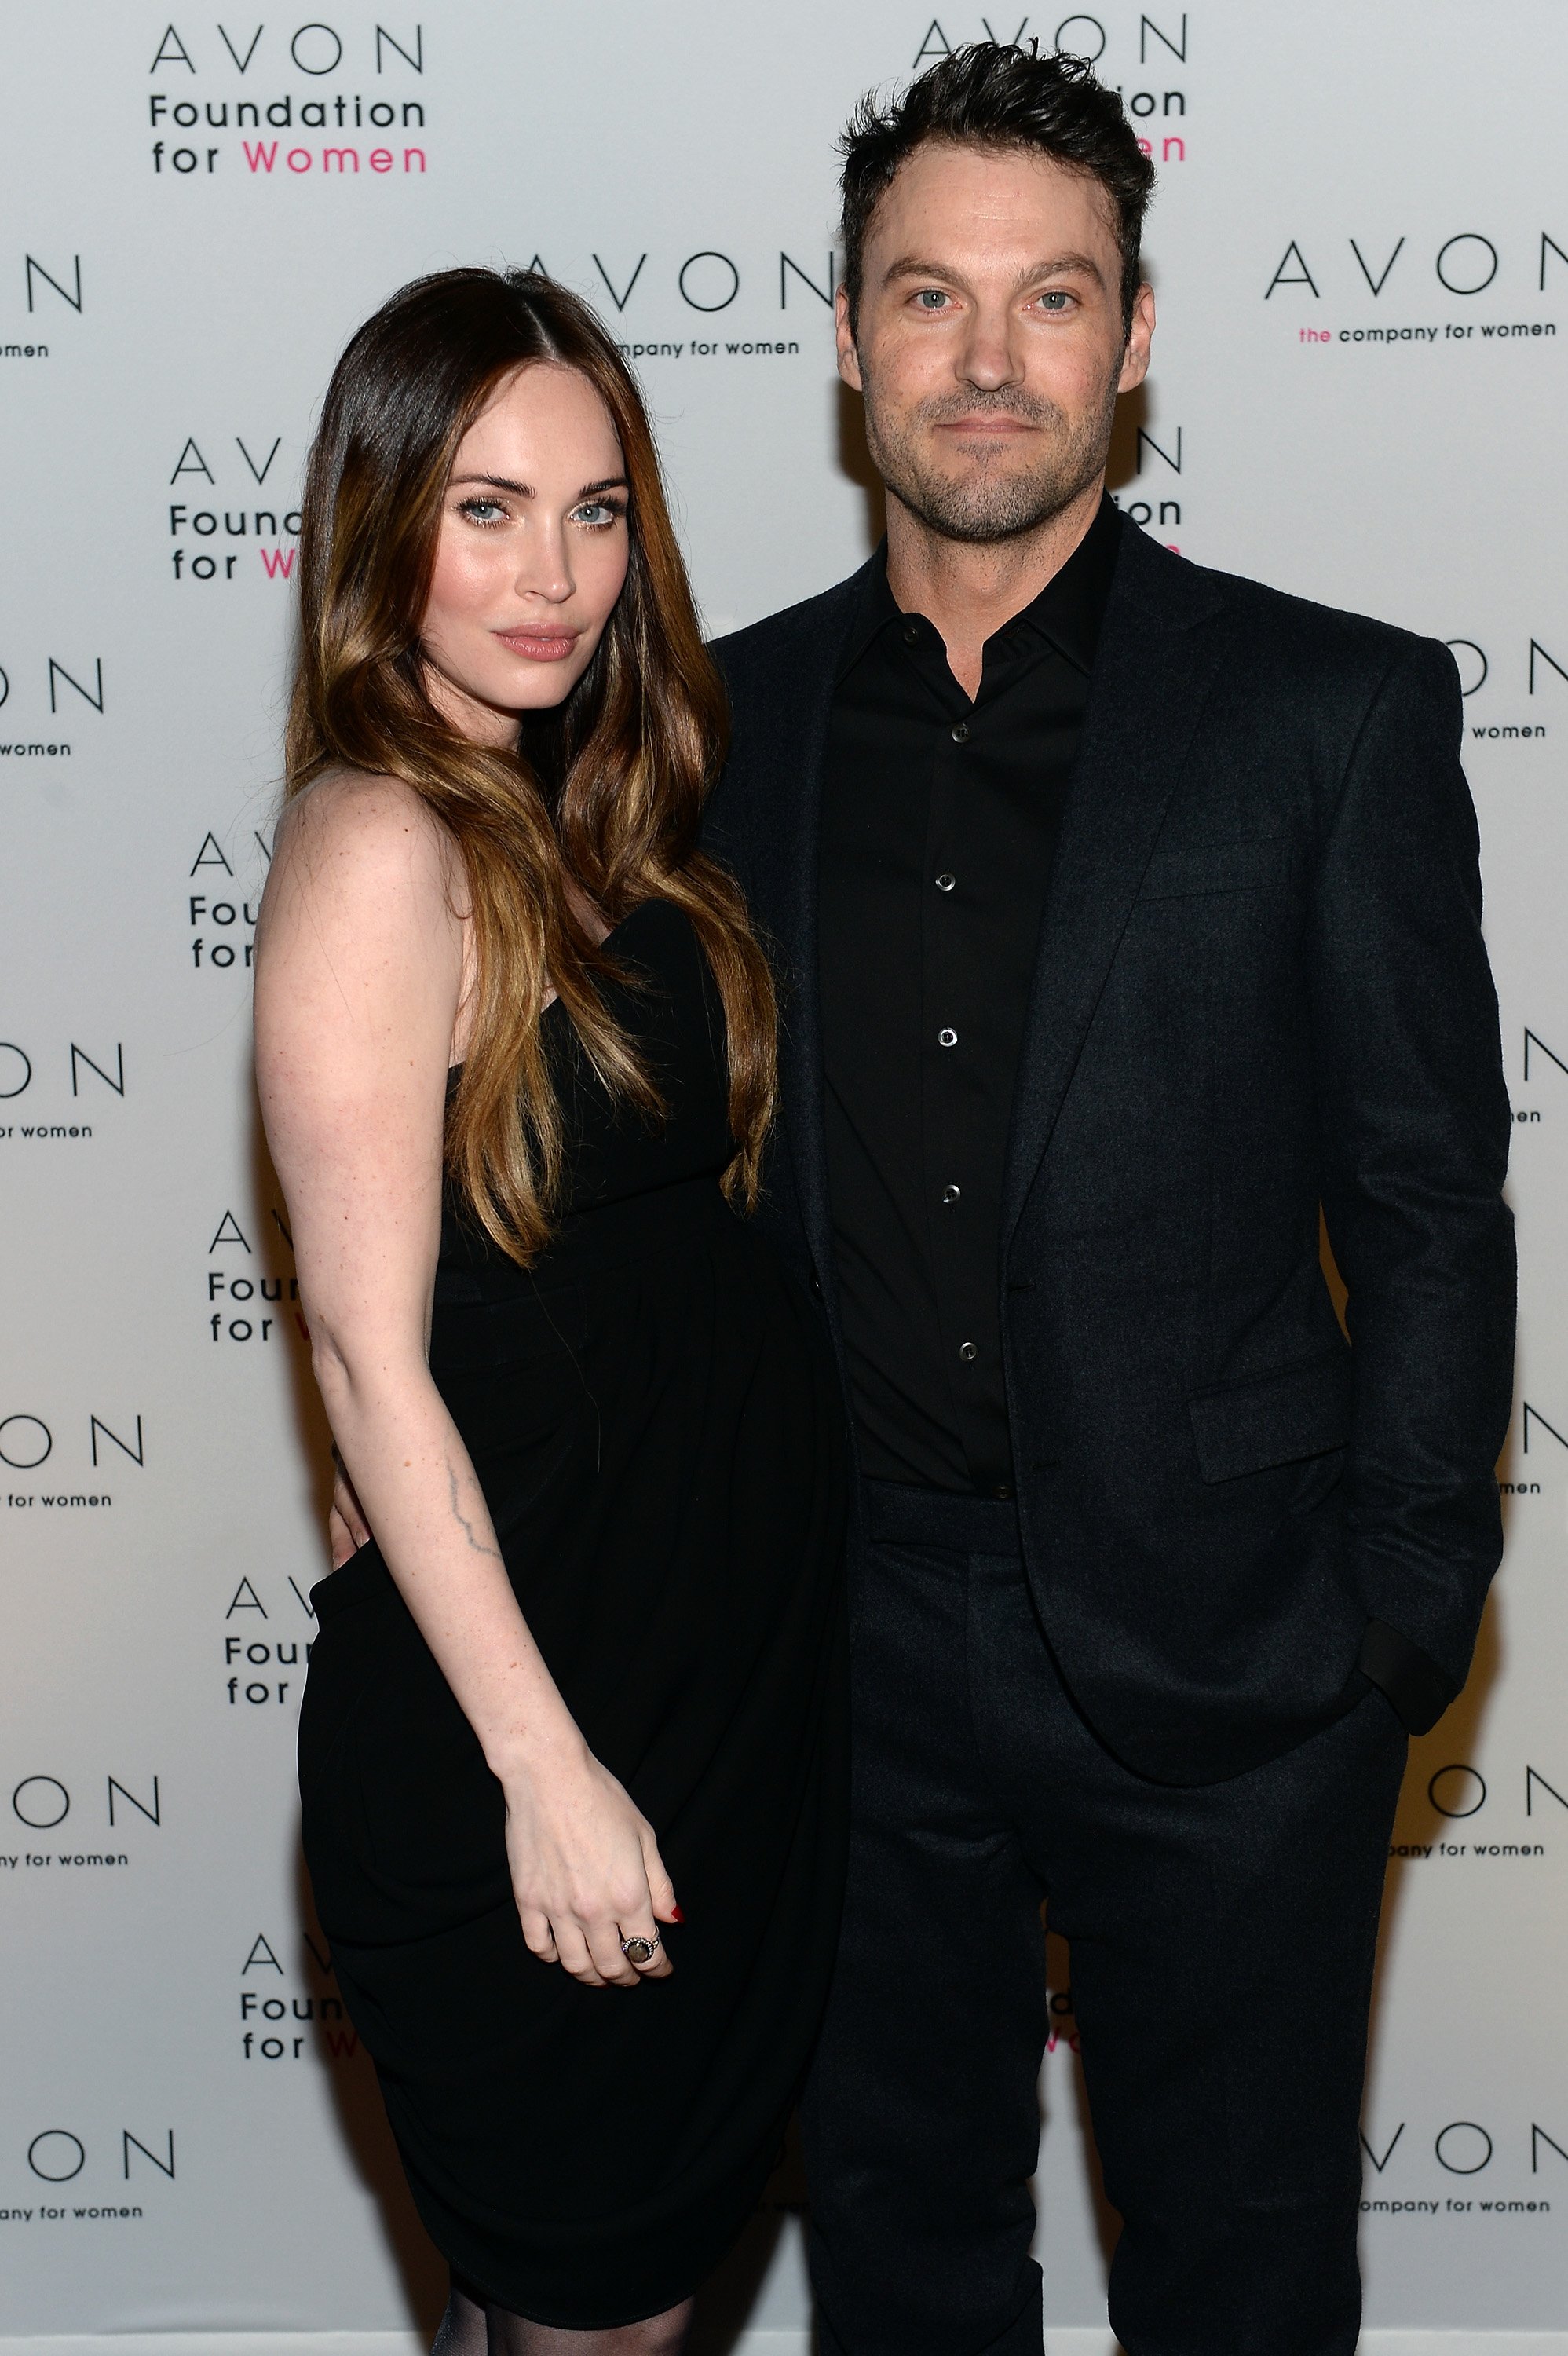 Megan Fox and Brian Austin Green at The Morgan Library & Museum in New York City on November 25, 2013. | Photo: Getty Images.